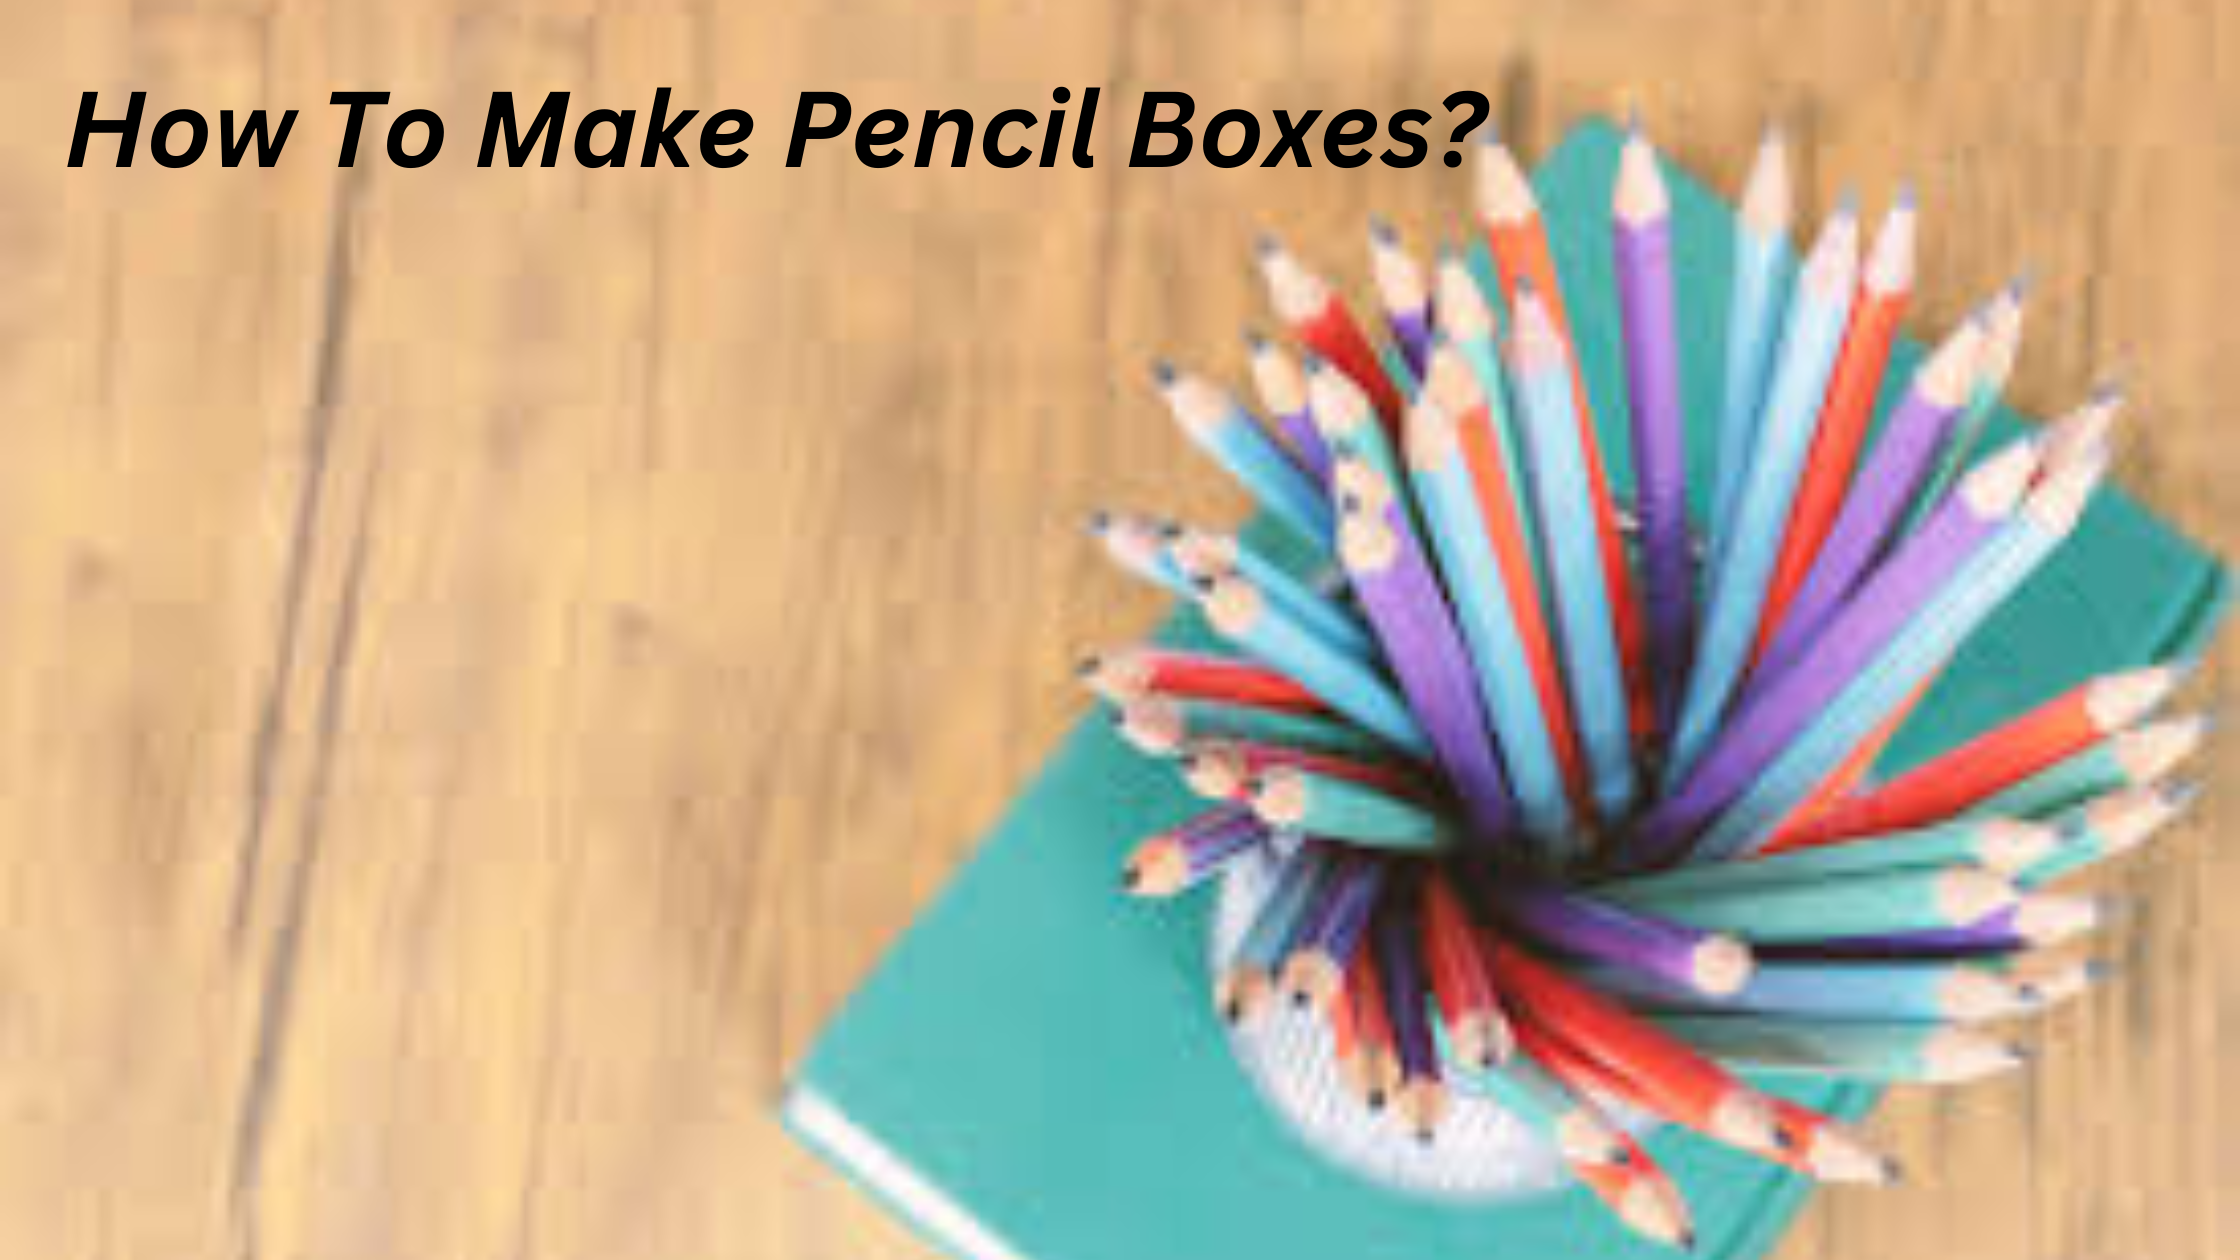 How To Make Pencil Boxes?